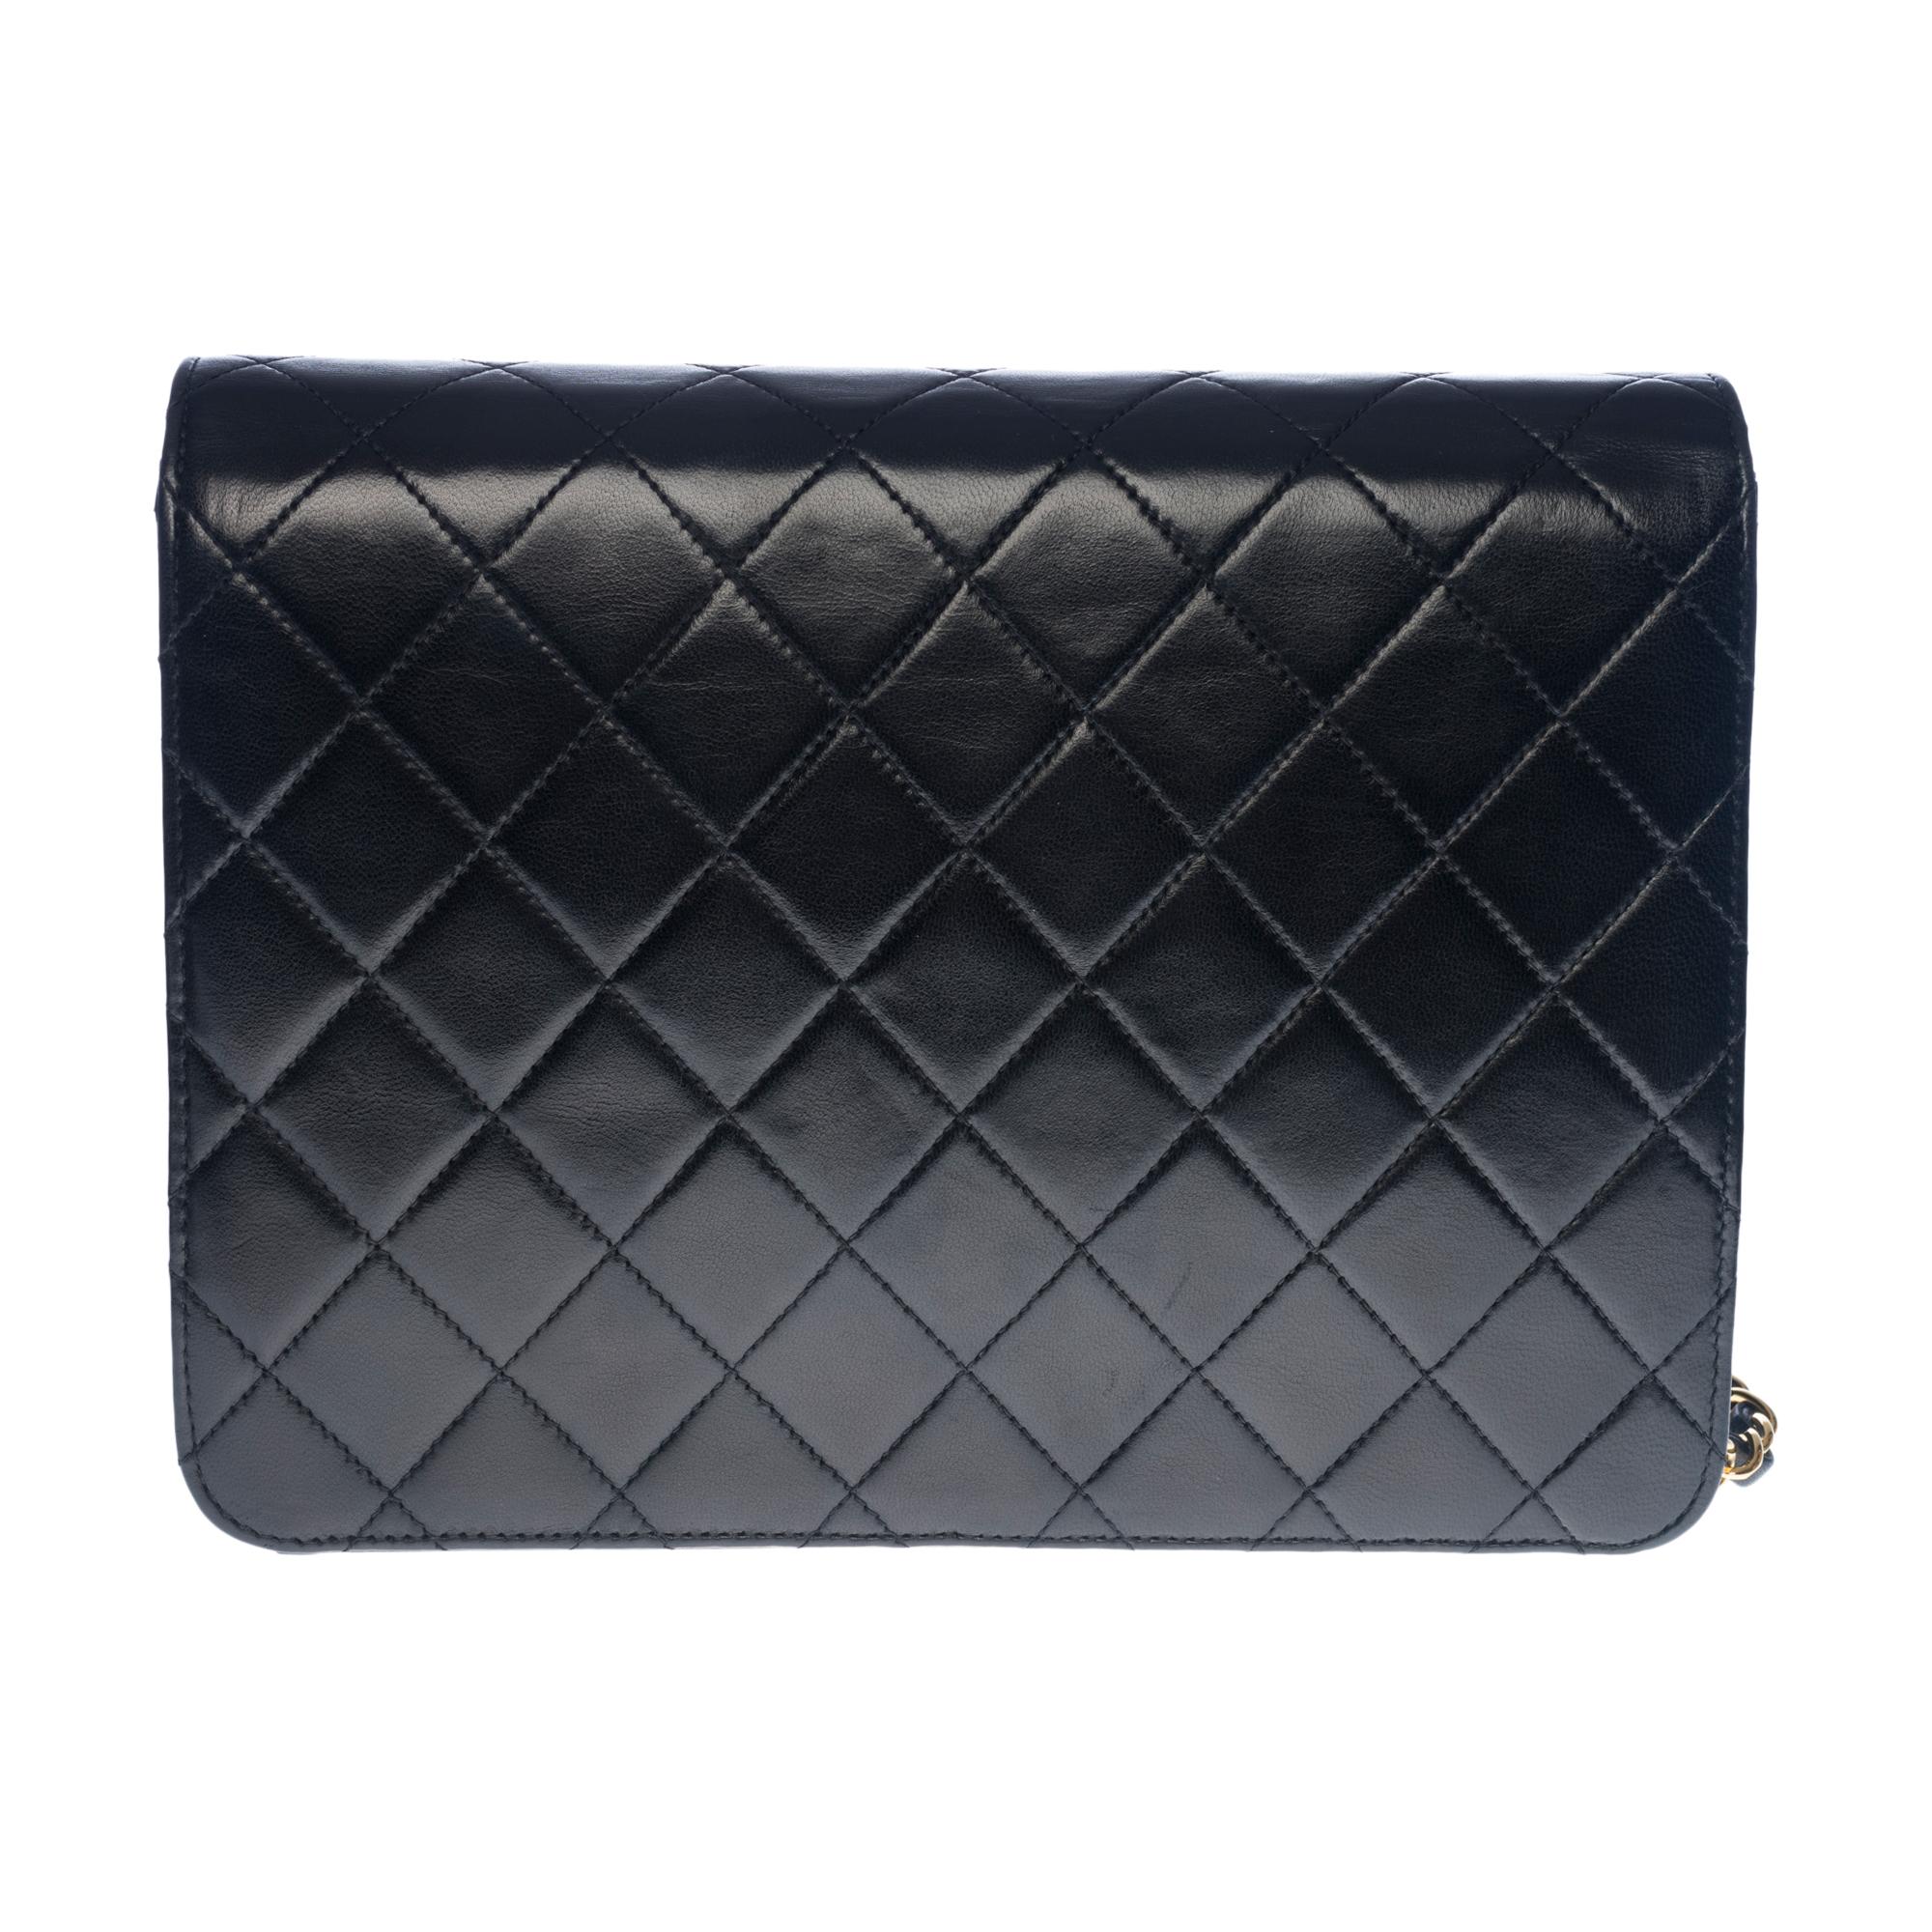 Black Amazing Chanel Classic Flap shoulder bag in black quilted lambskin, GHW